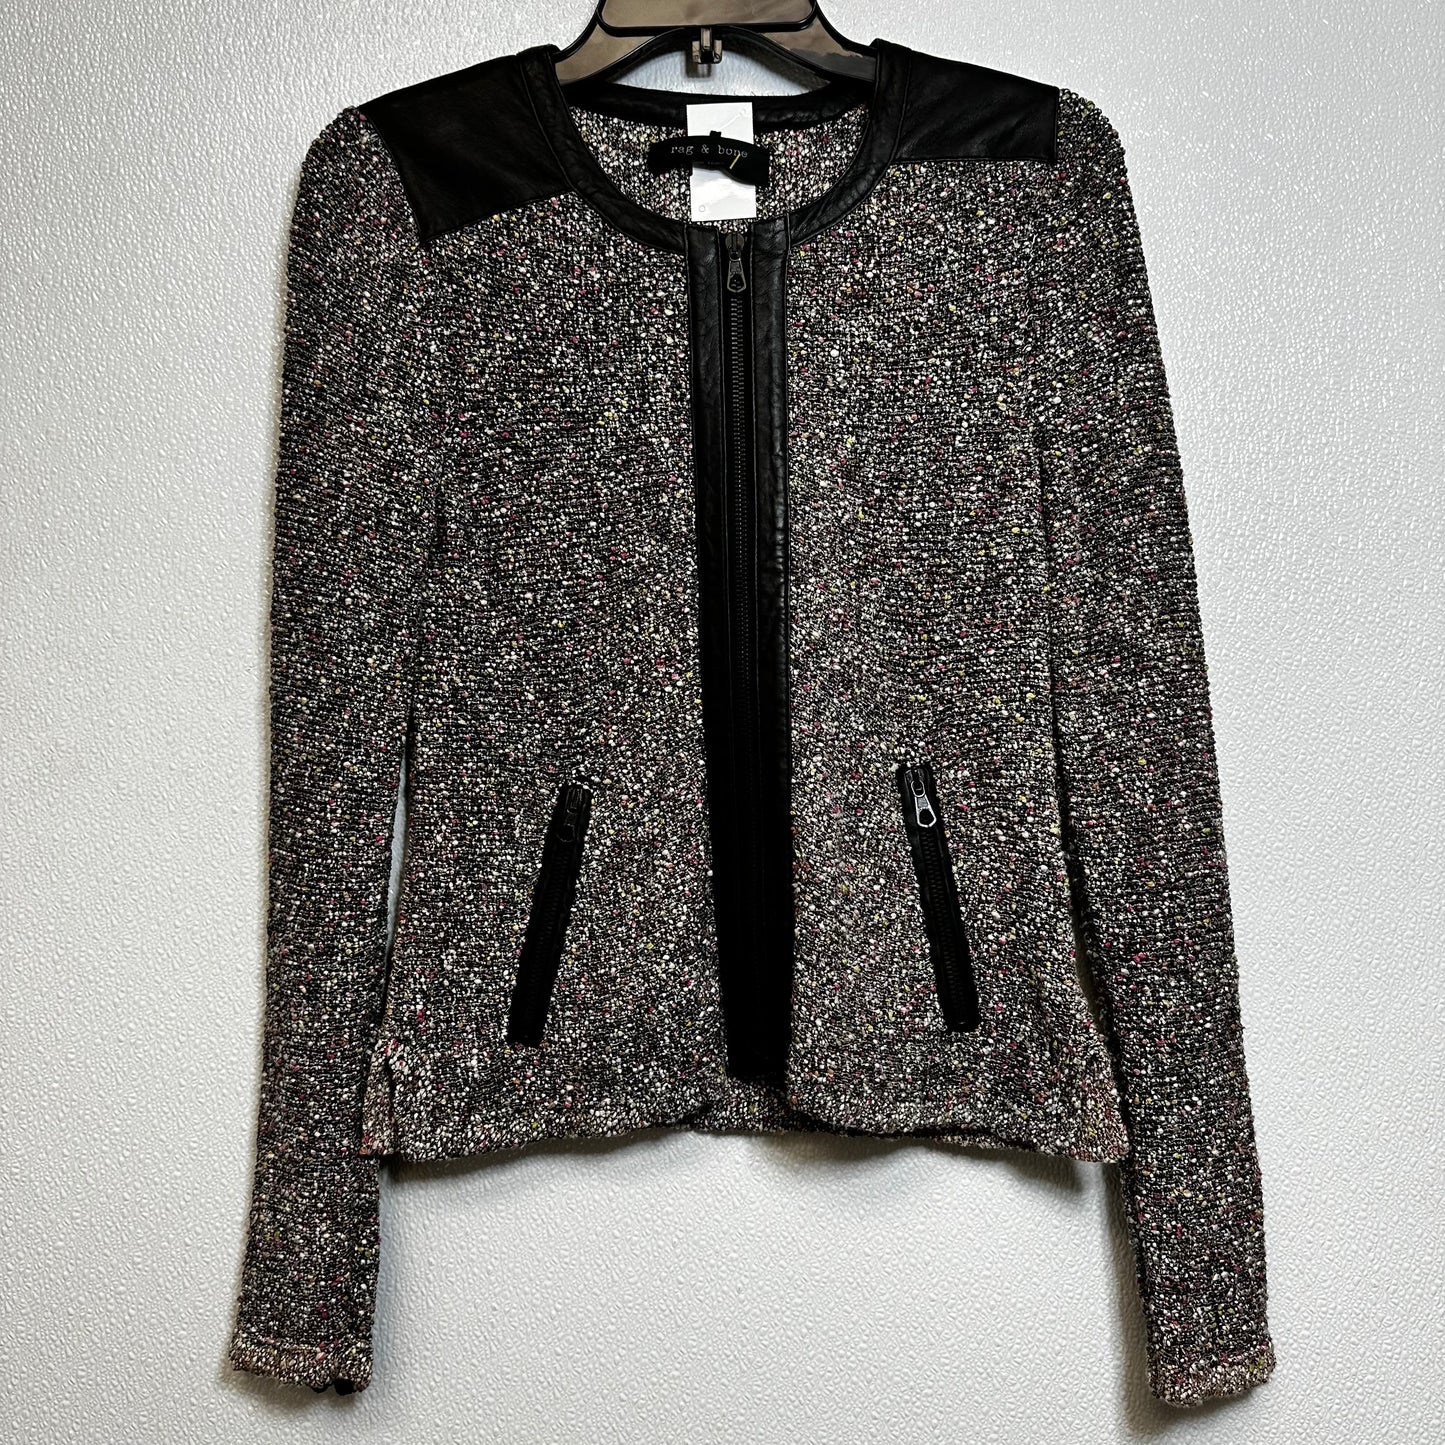 Sweater Cardigan By Rag And Bone  Size: S